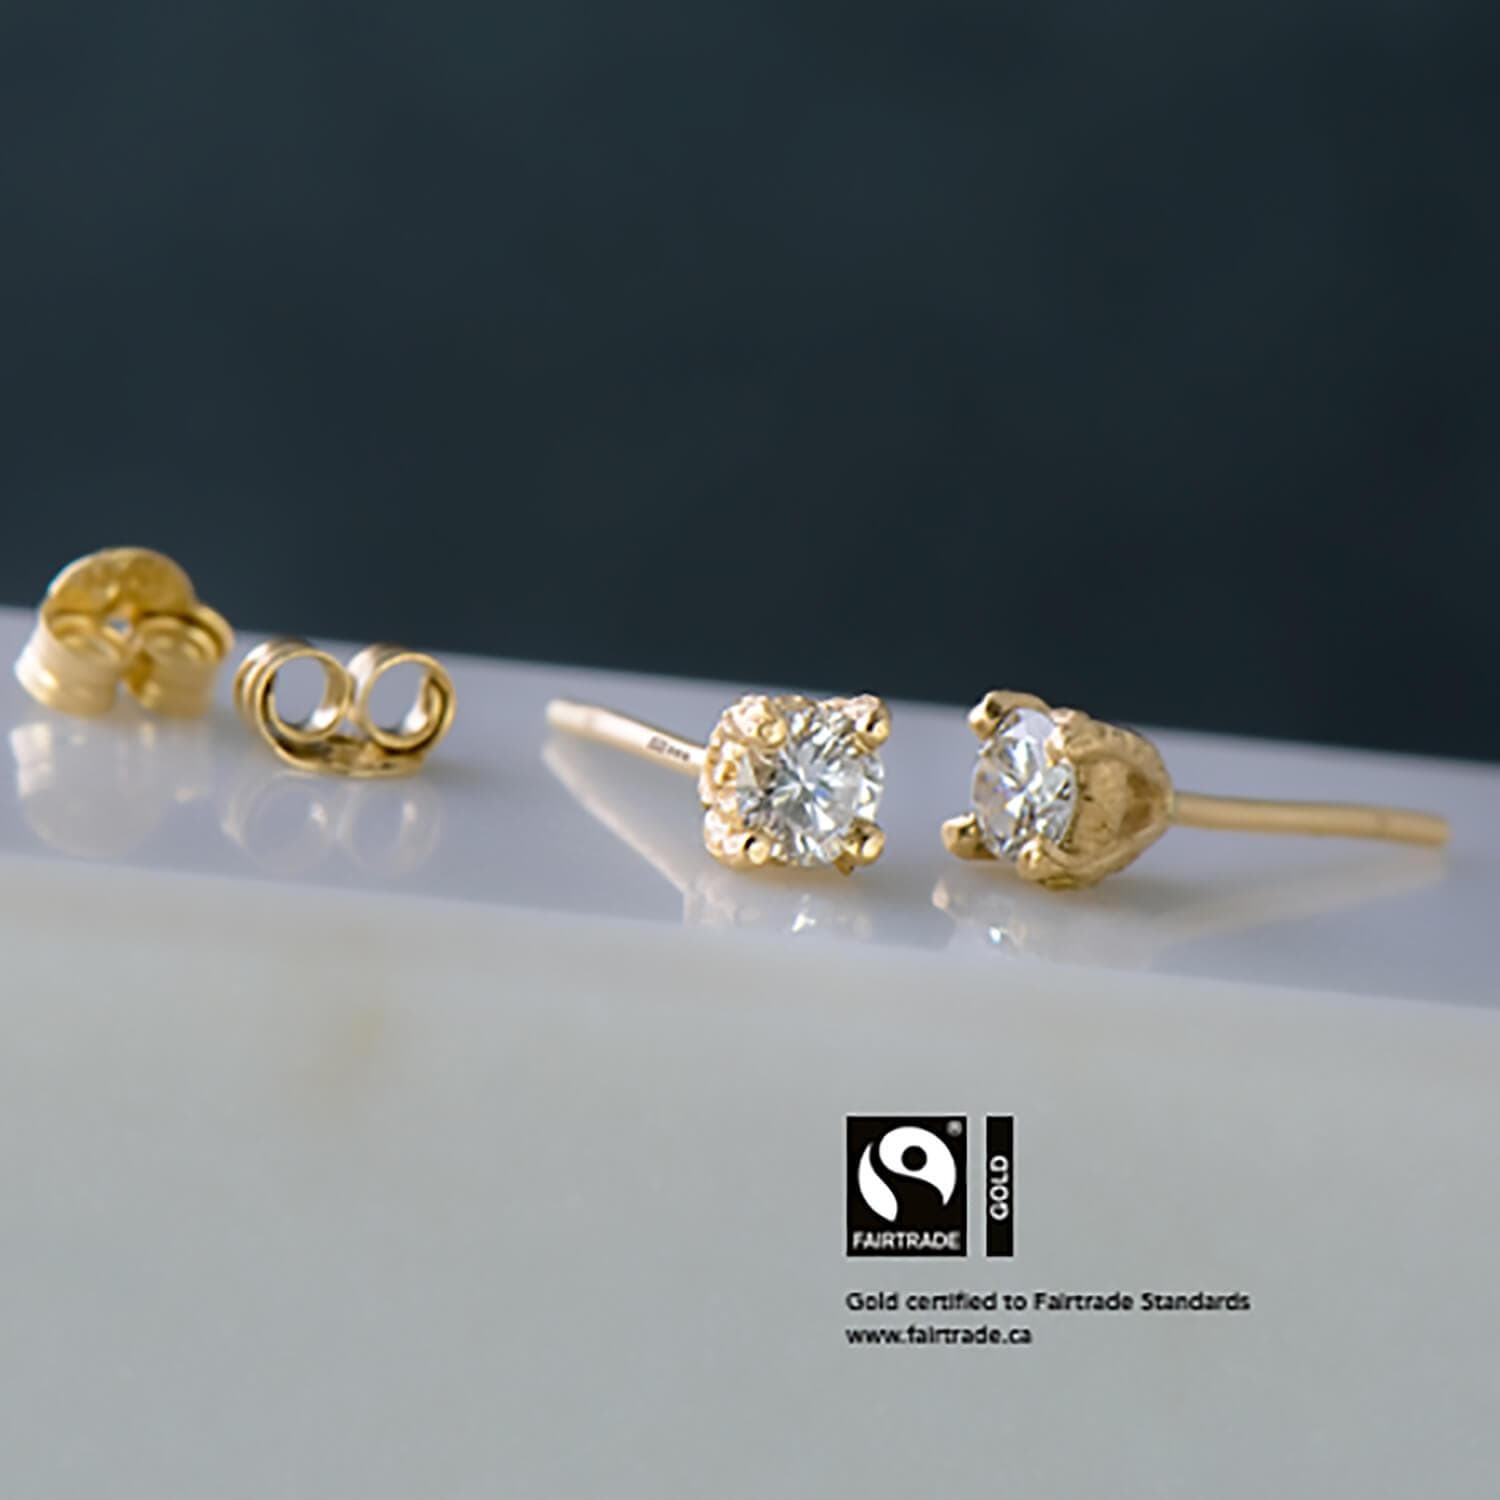 Baroque recycled diamond studs set in a four prong setting in 14 karat Fairtrade Certified gold. With a total diamond weight of 0.39 carats